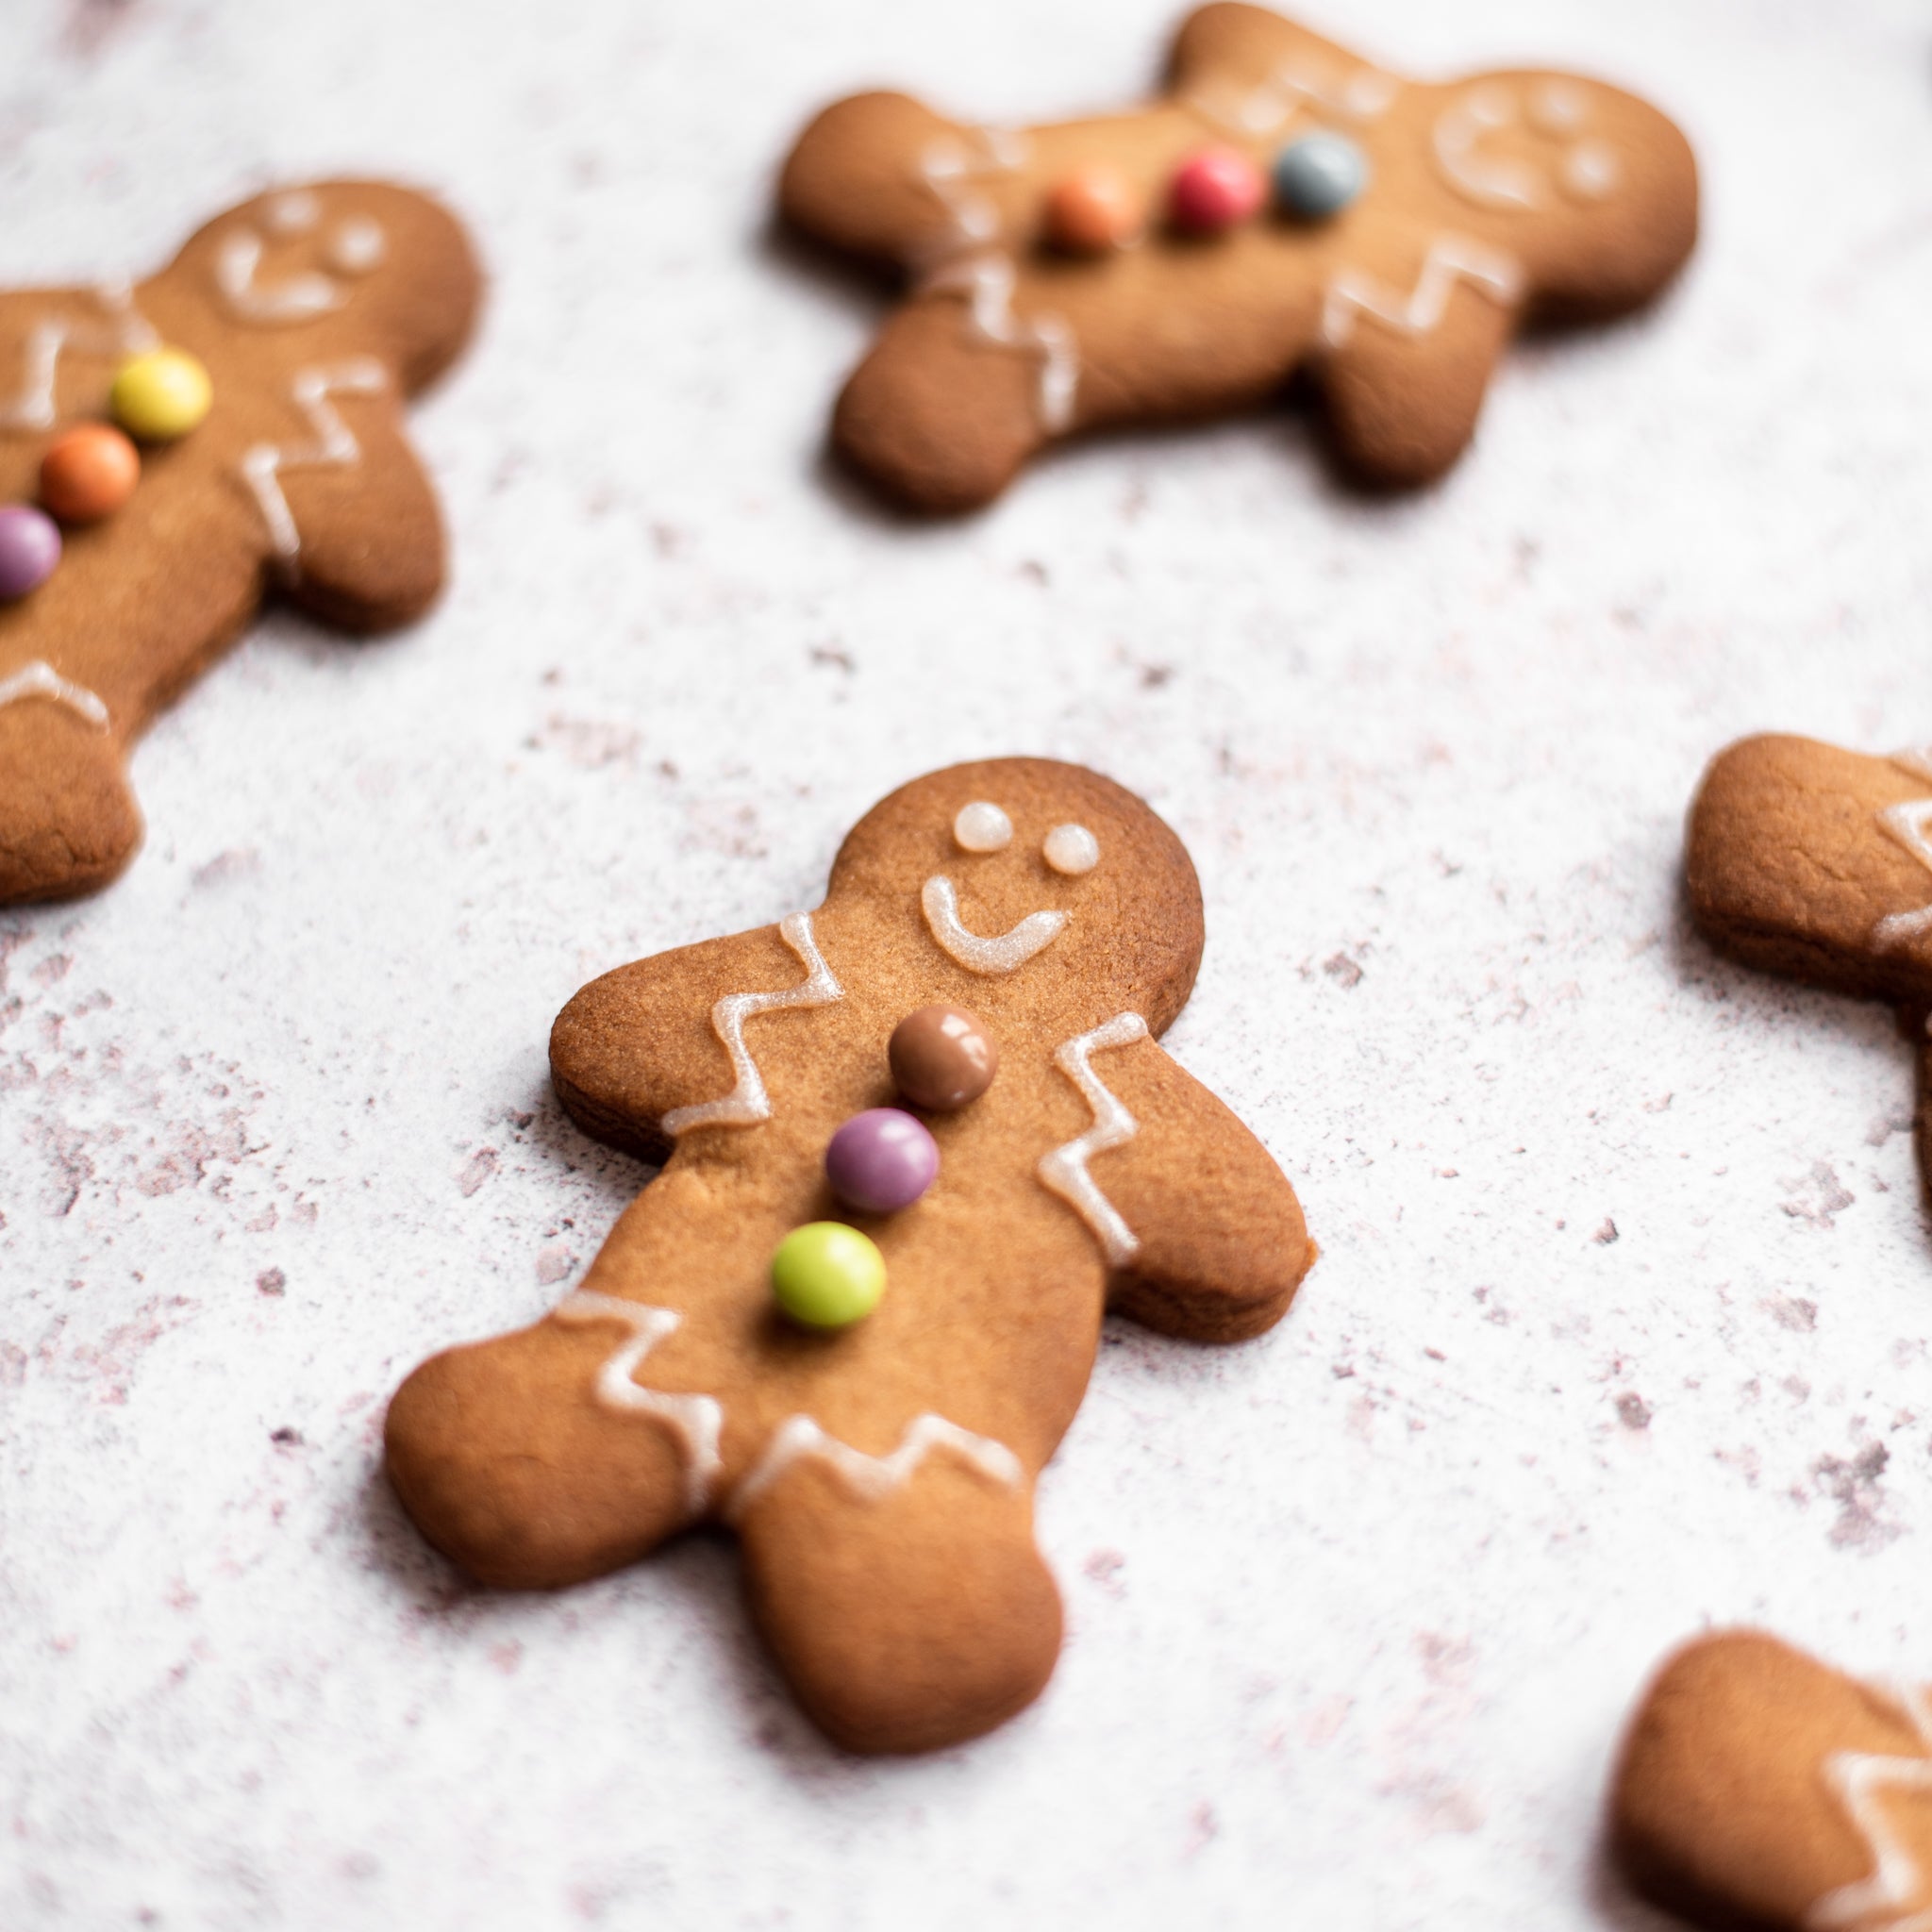 Christmas gingerbread man with icing and buttons made of sweets